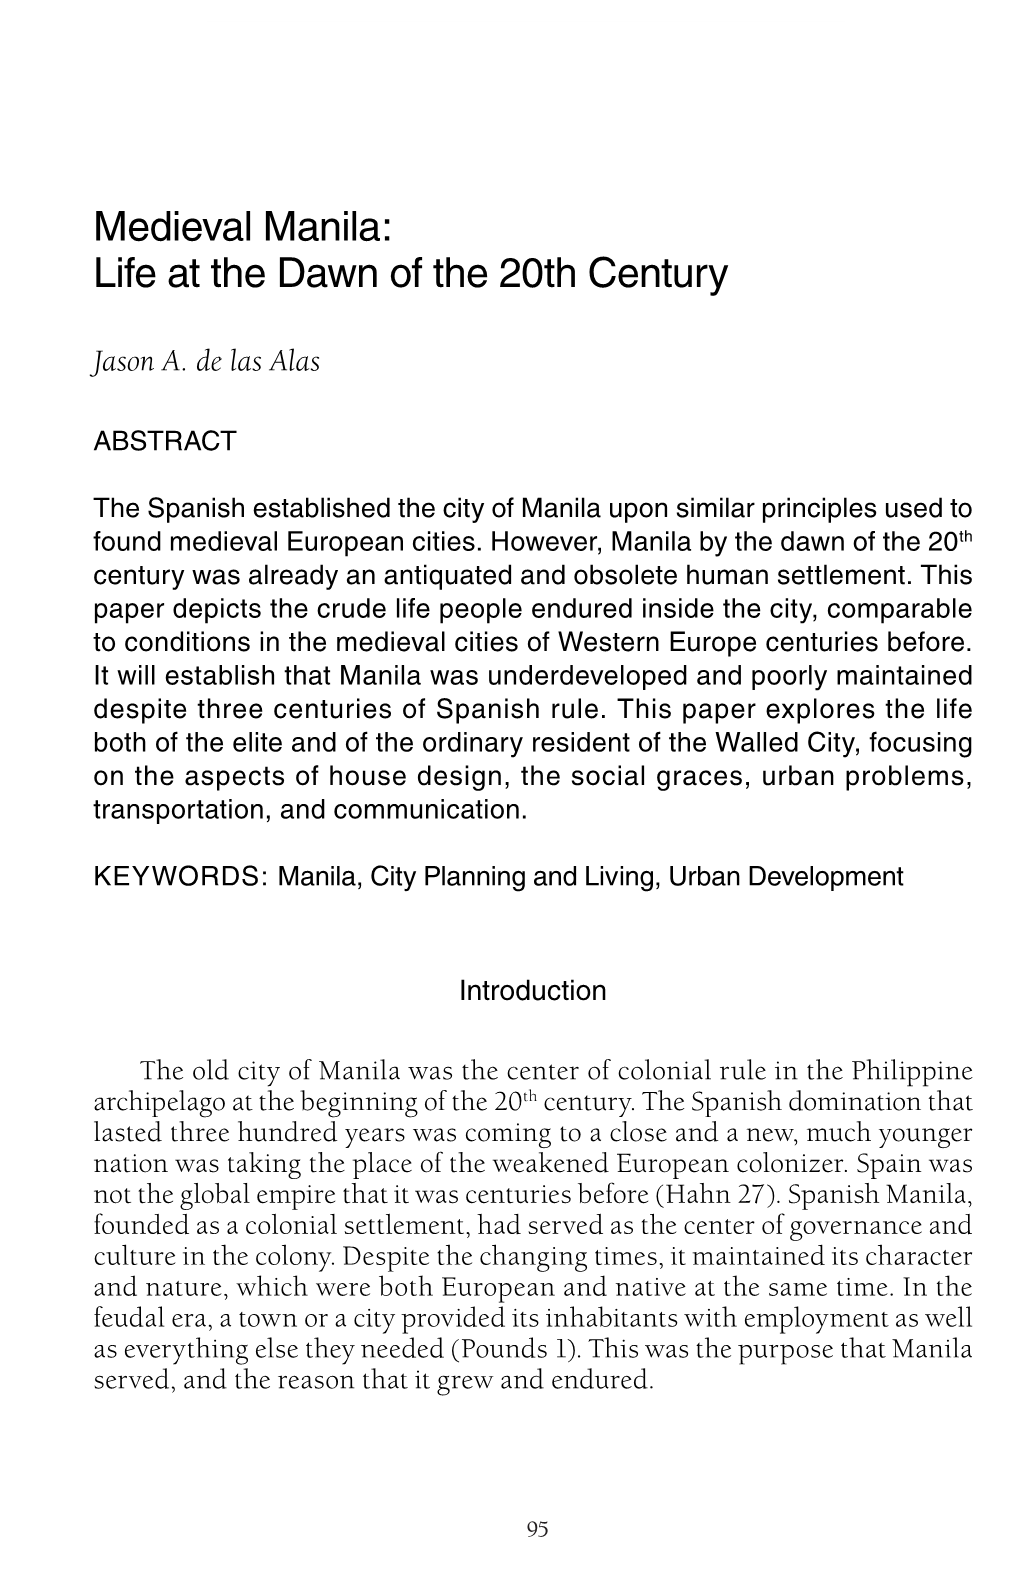 Medieval Manila: Life at the Dawn of the 20Th Century